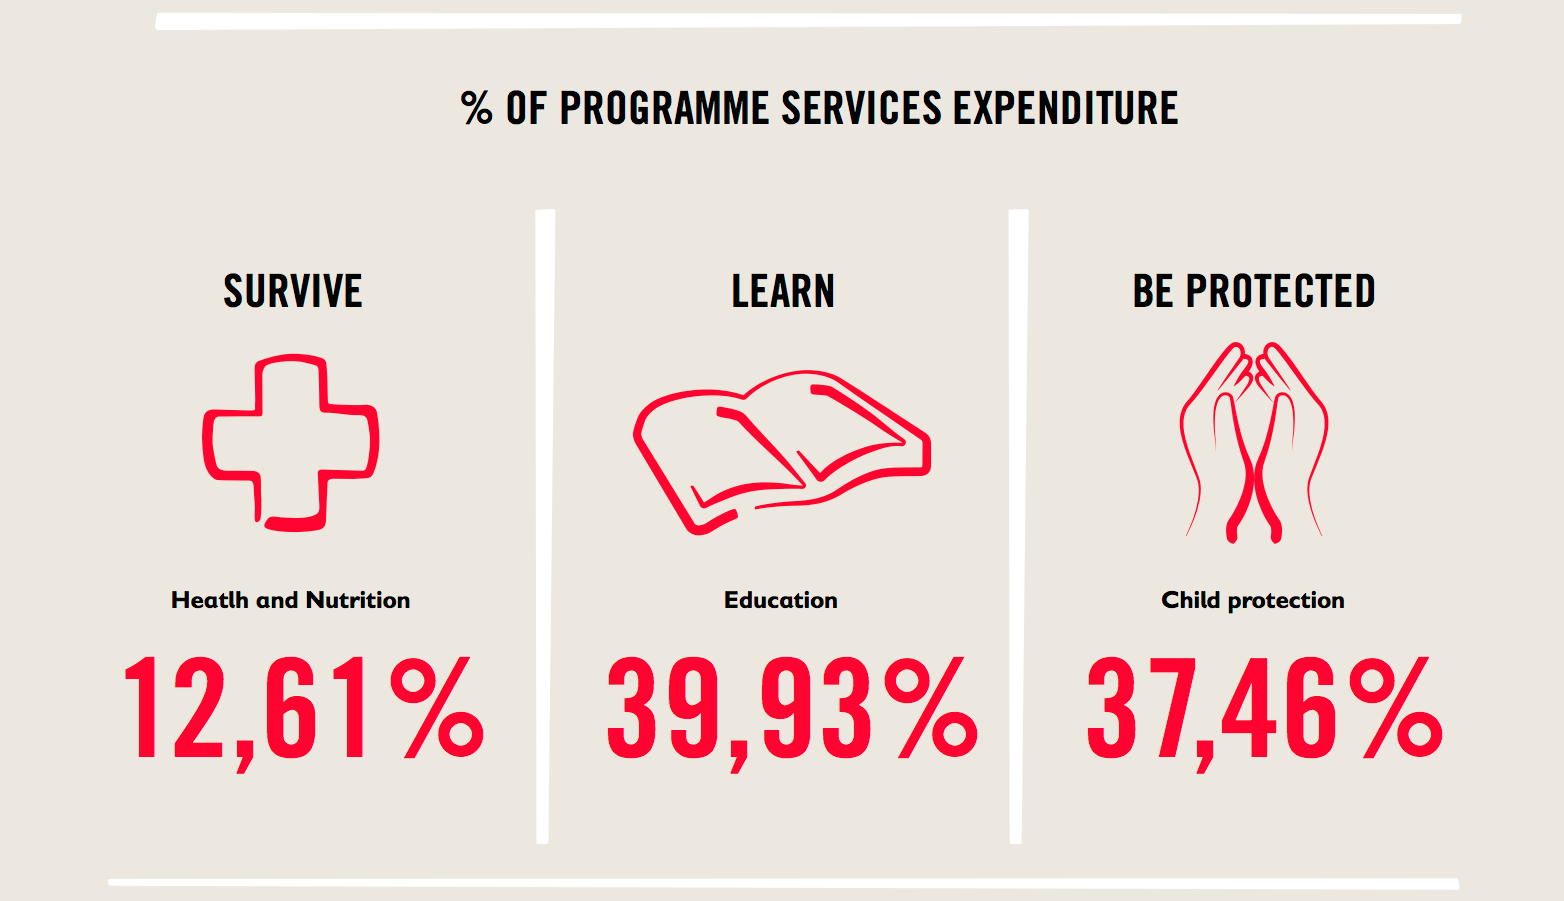 Expenditures-Programme-Services.png